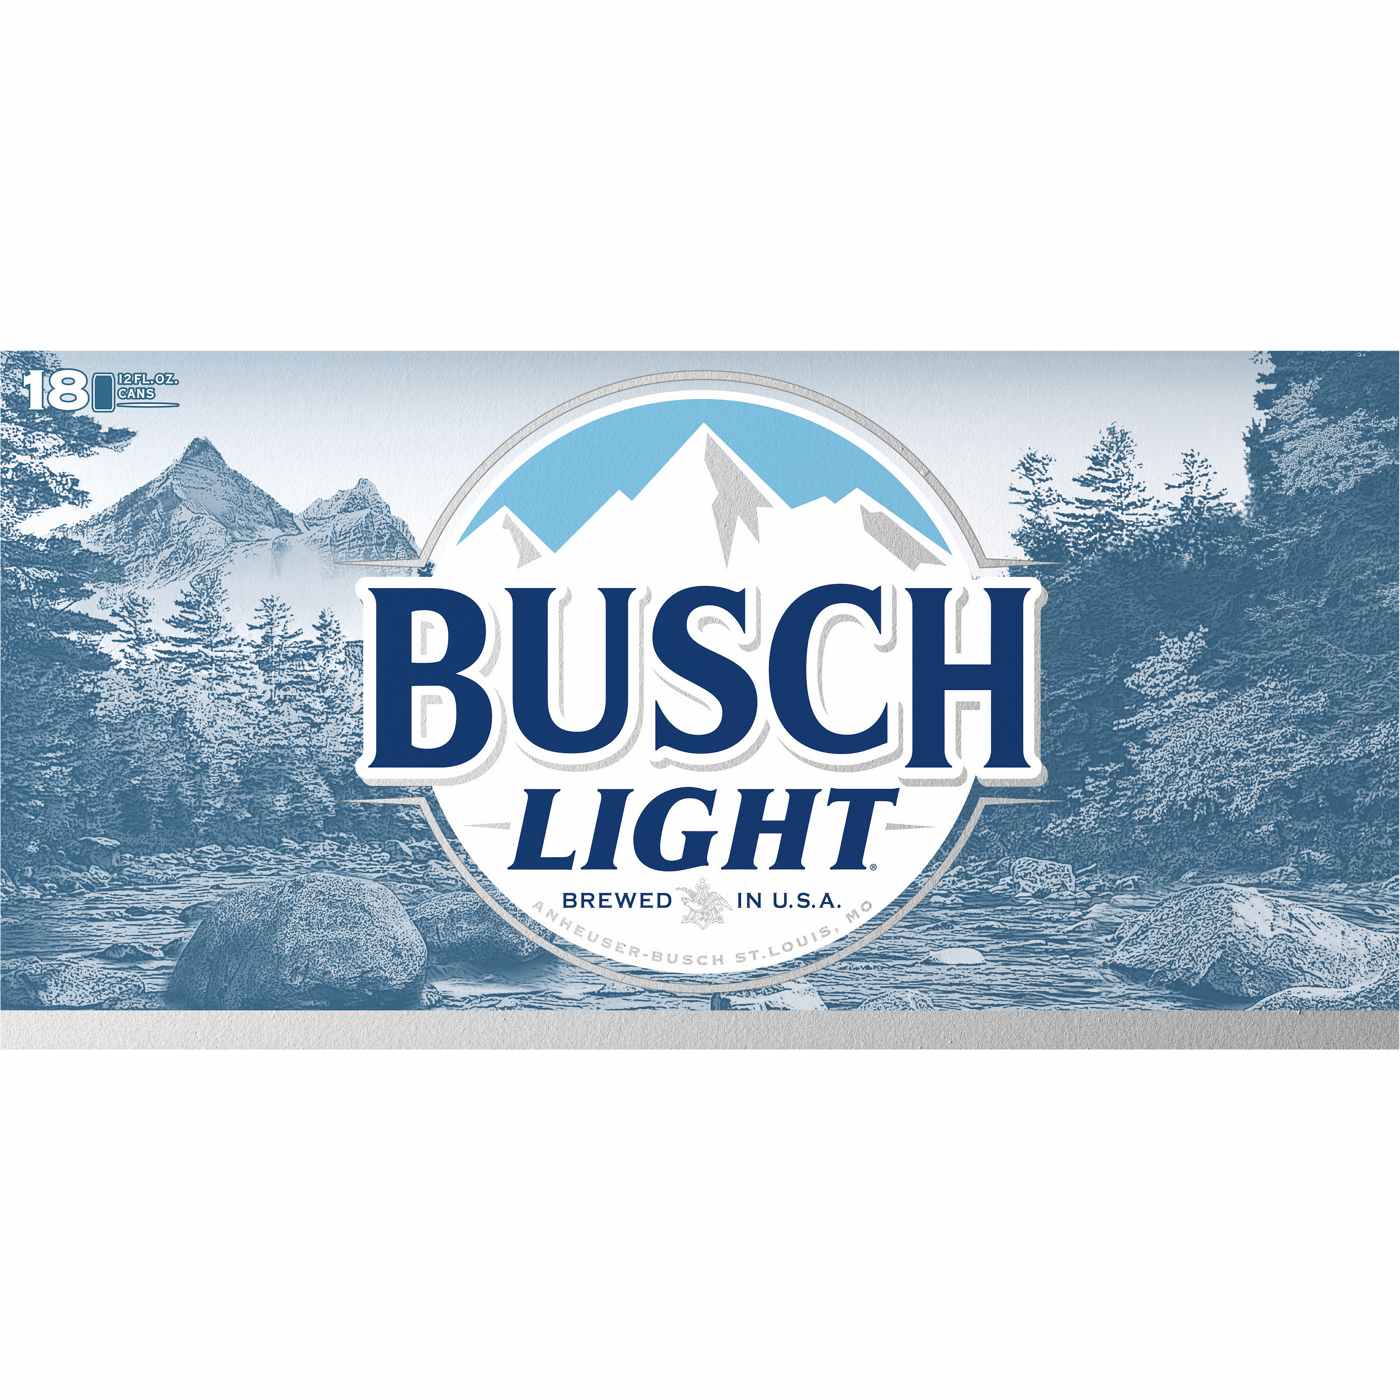 Busch Light Beer 18 pk Cans; image 2 of 2